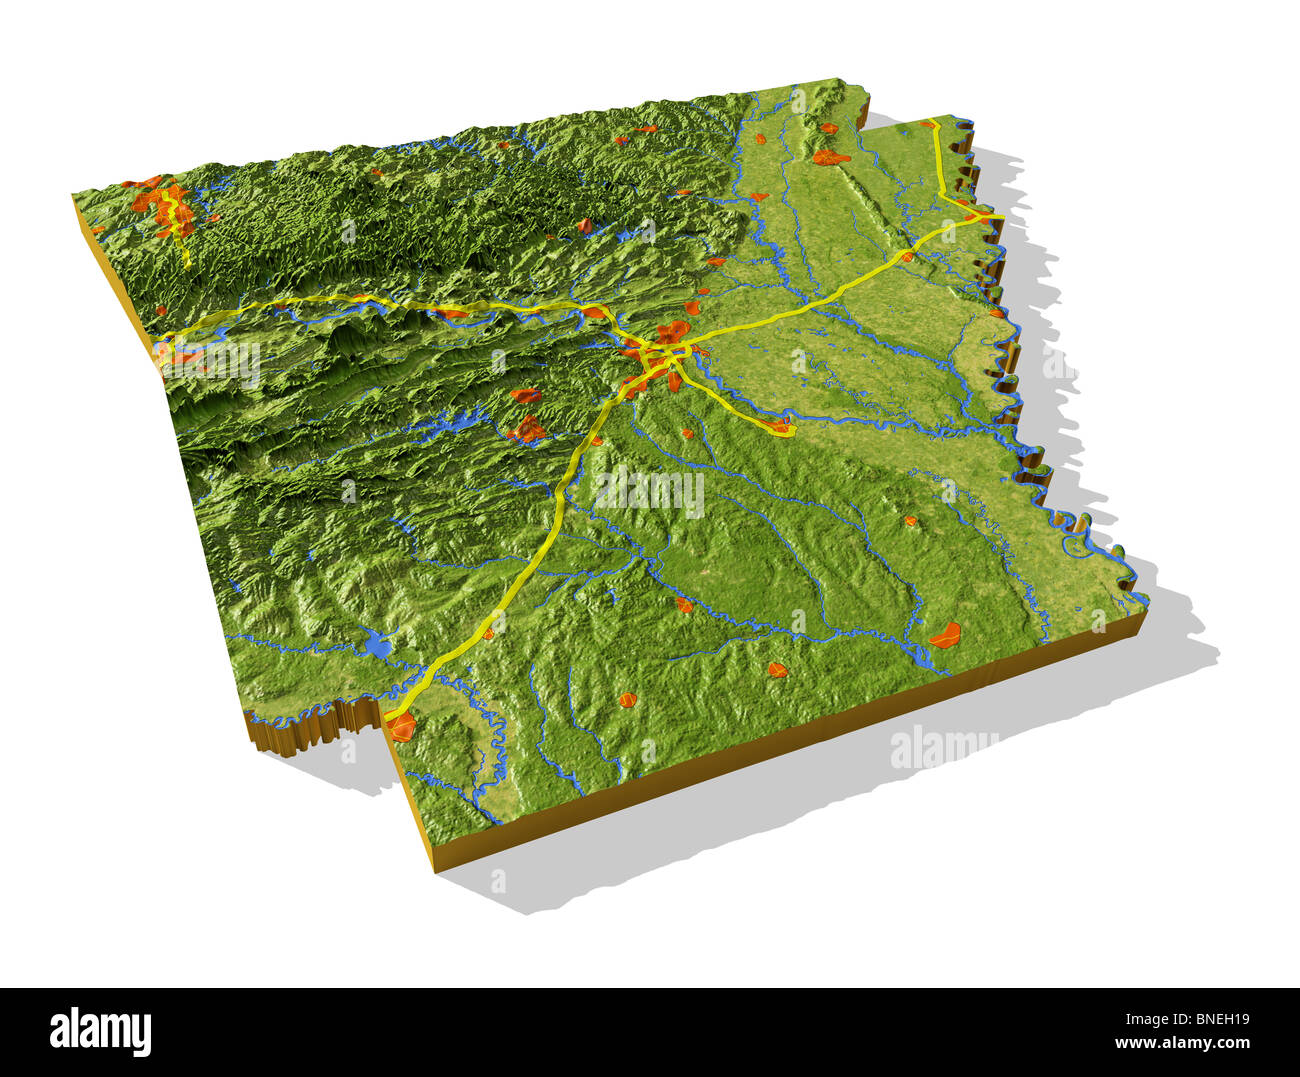 Arkansas, 3D relief map cut-out with urban areas and interstate highways. Stock Photo